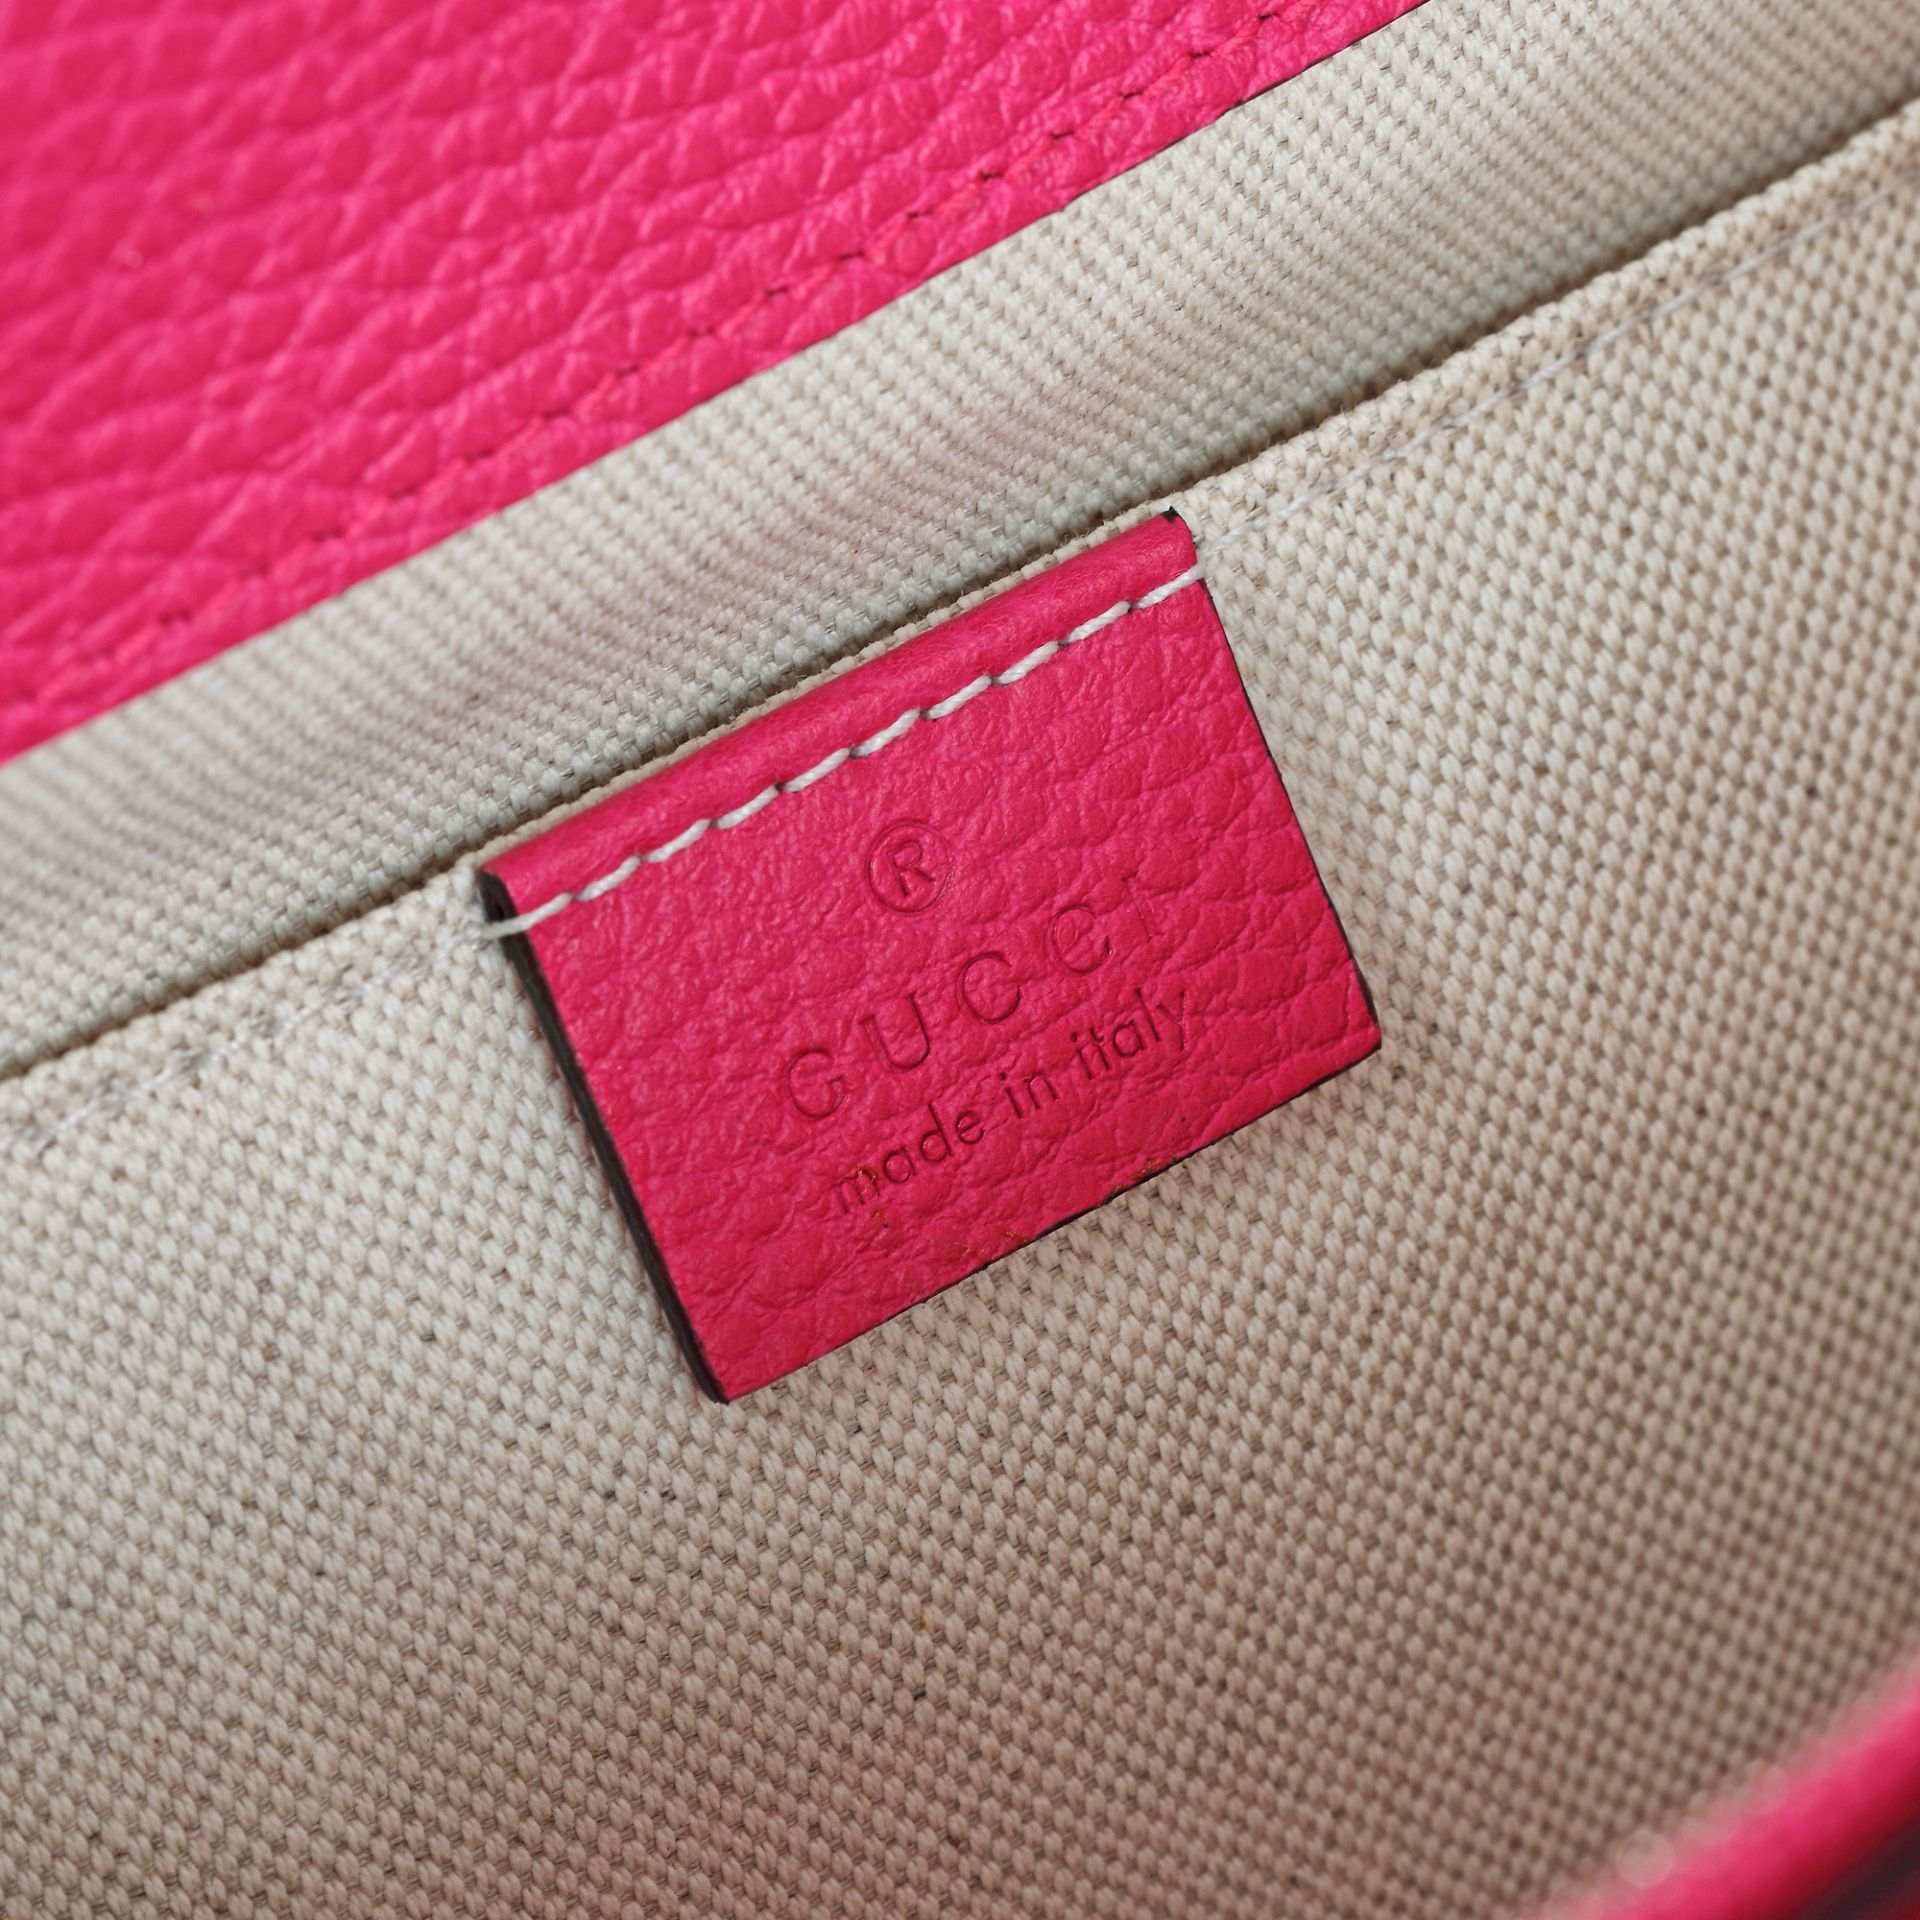 "Dionysus" - Gucci bag, leather, pink, decorated with bamboo handle - Image 5 of 5